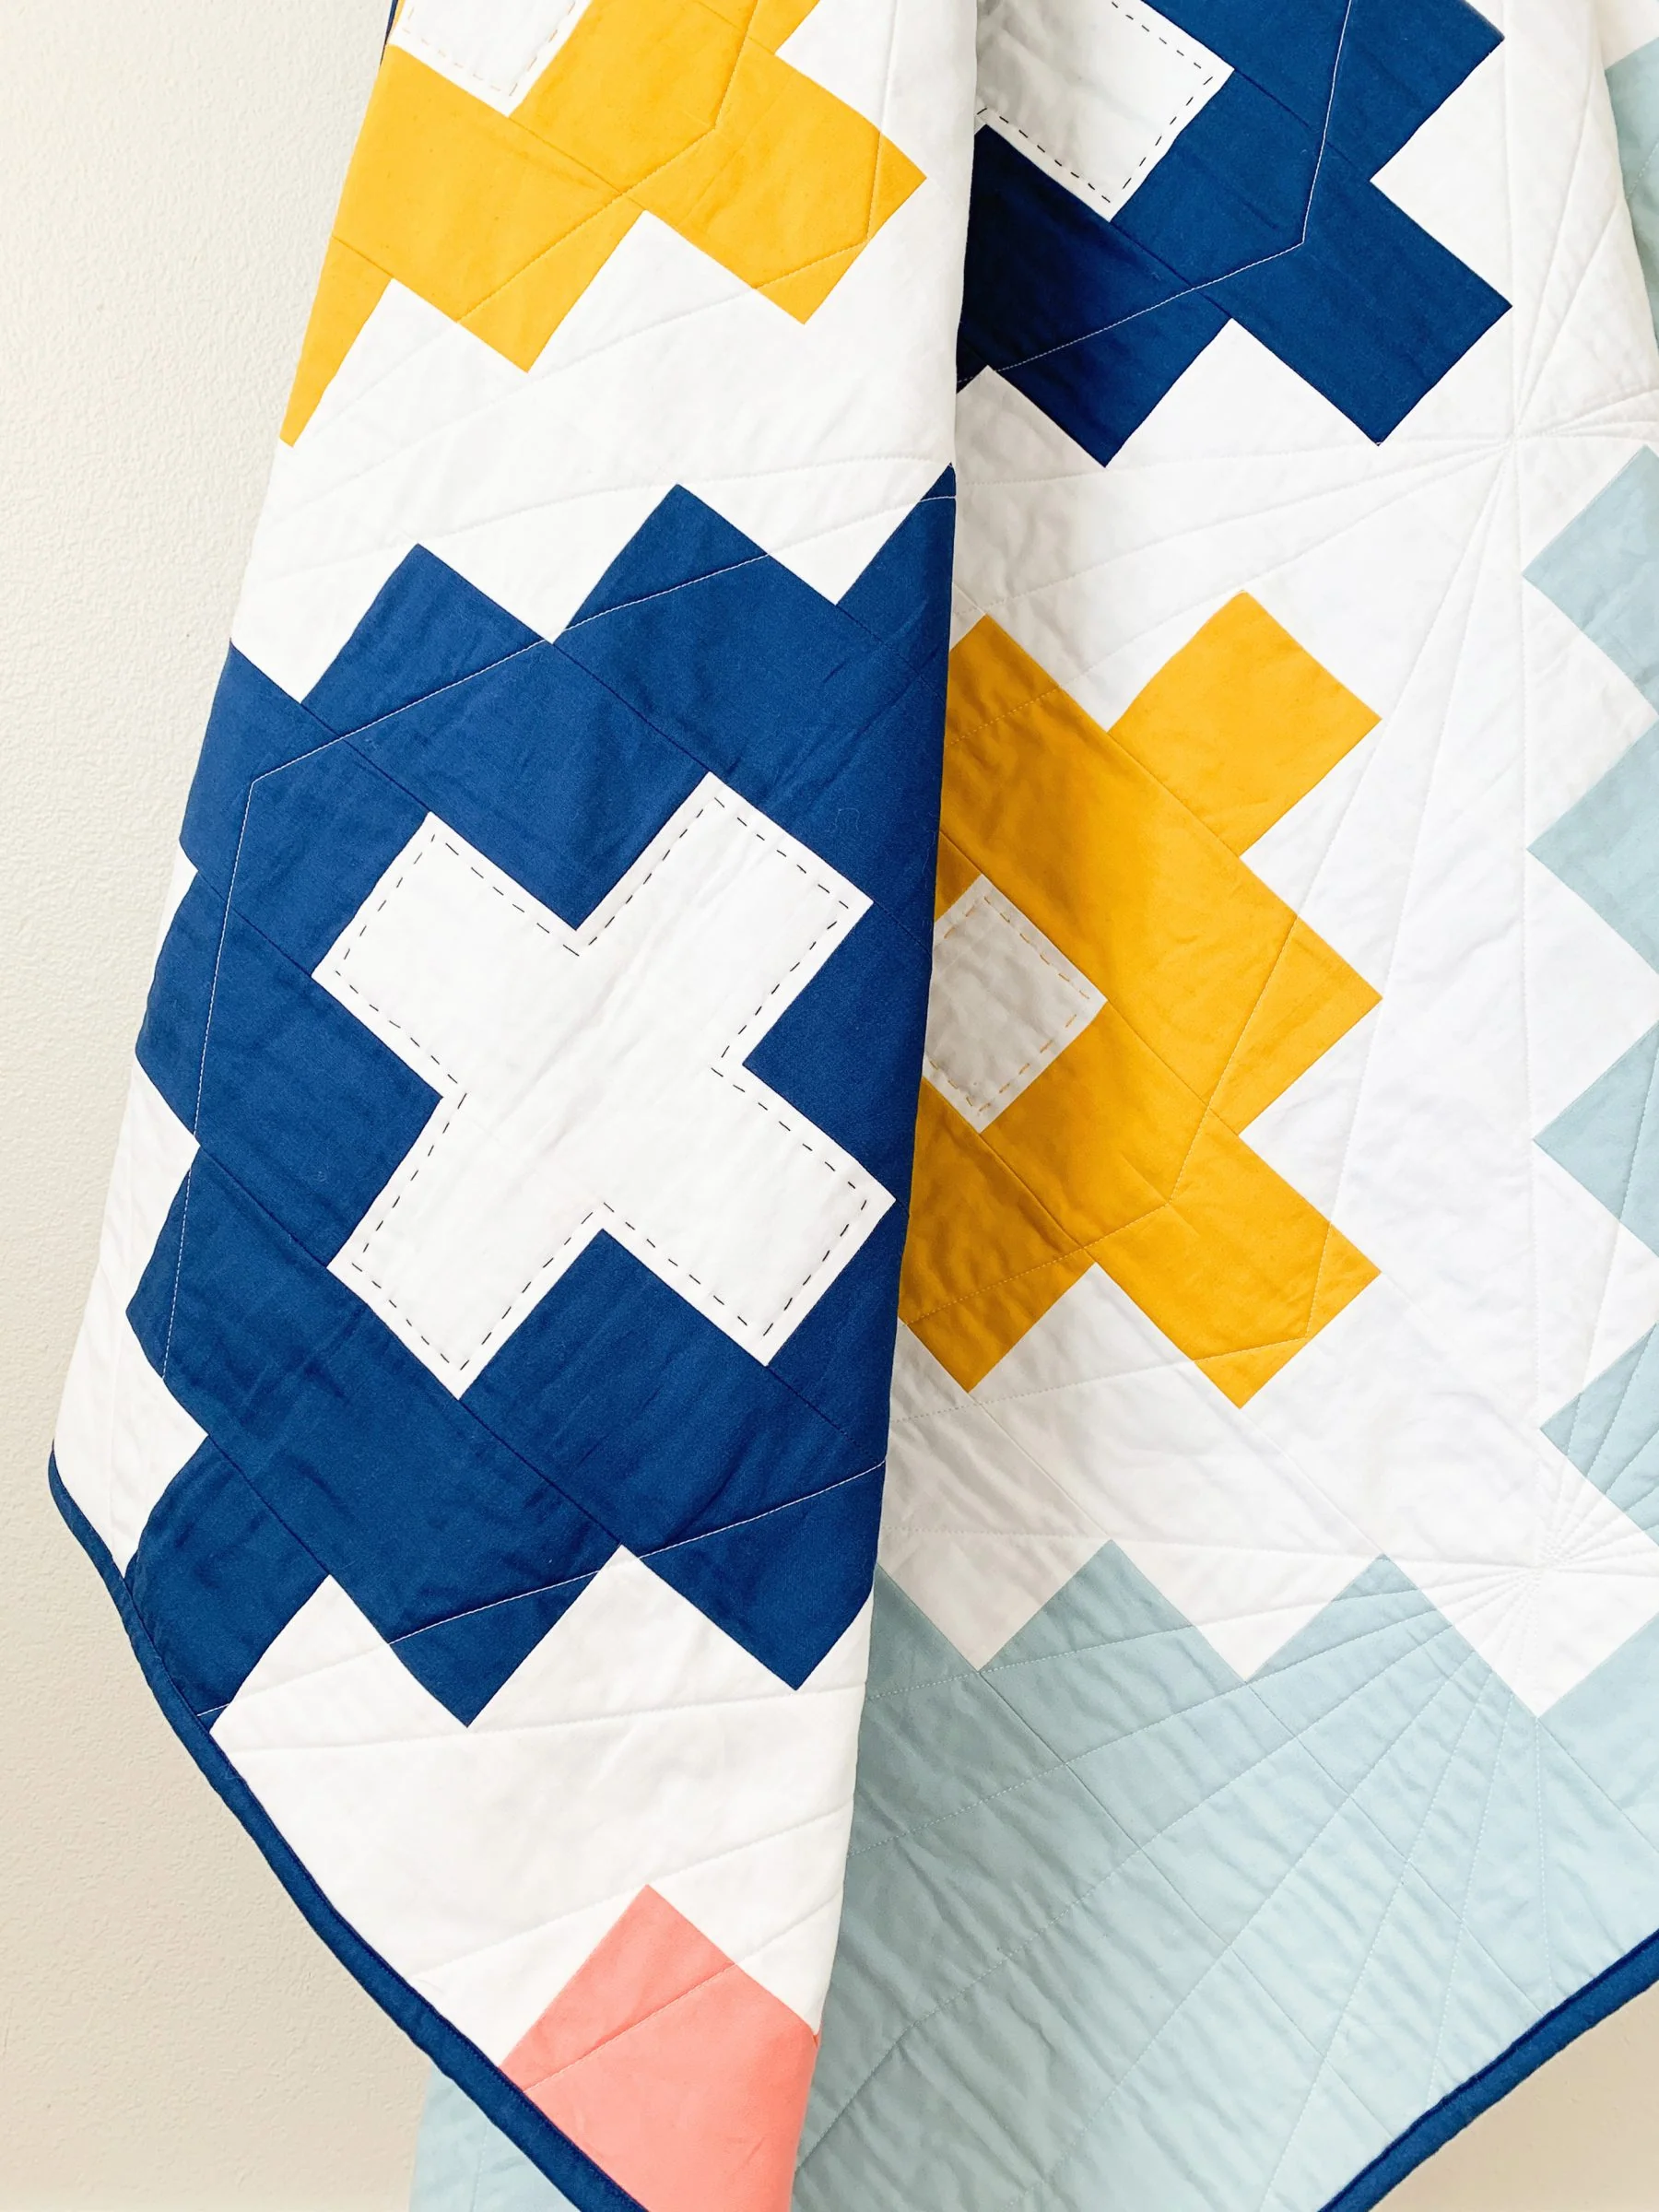 Andes Ode quilt patten - inspired by Mapuche textiles from my home country, Chile